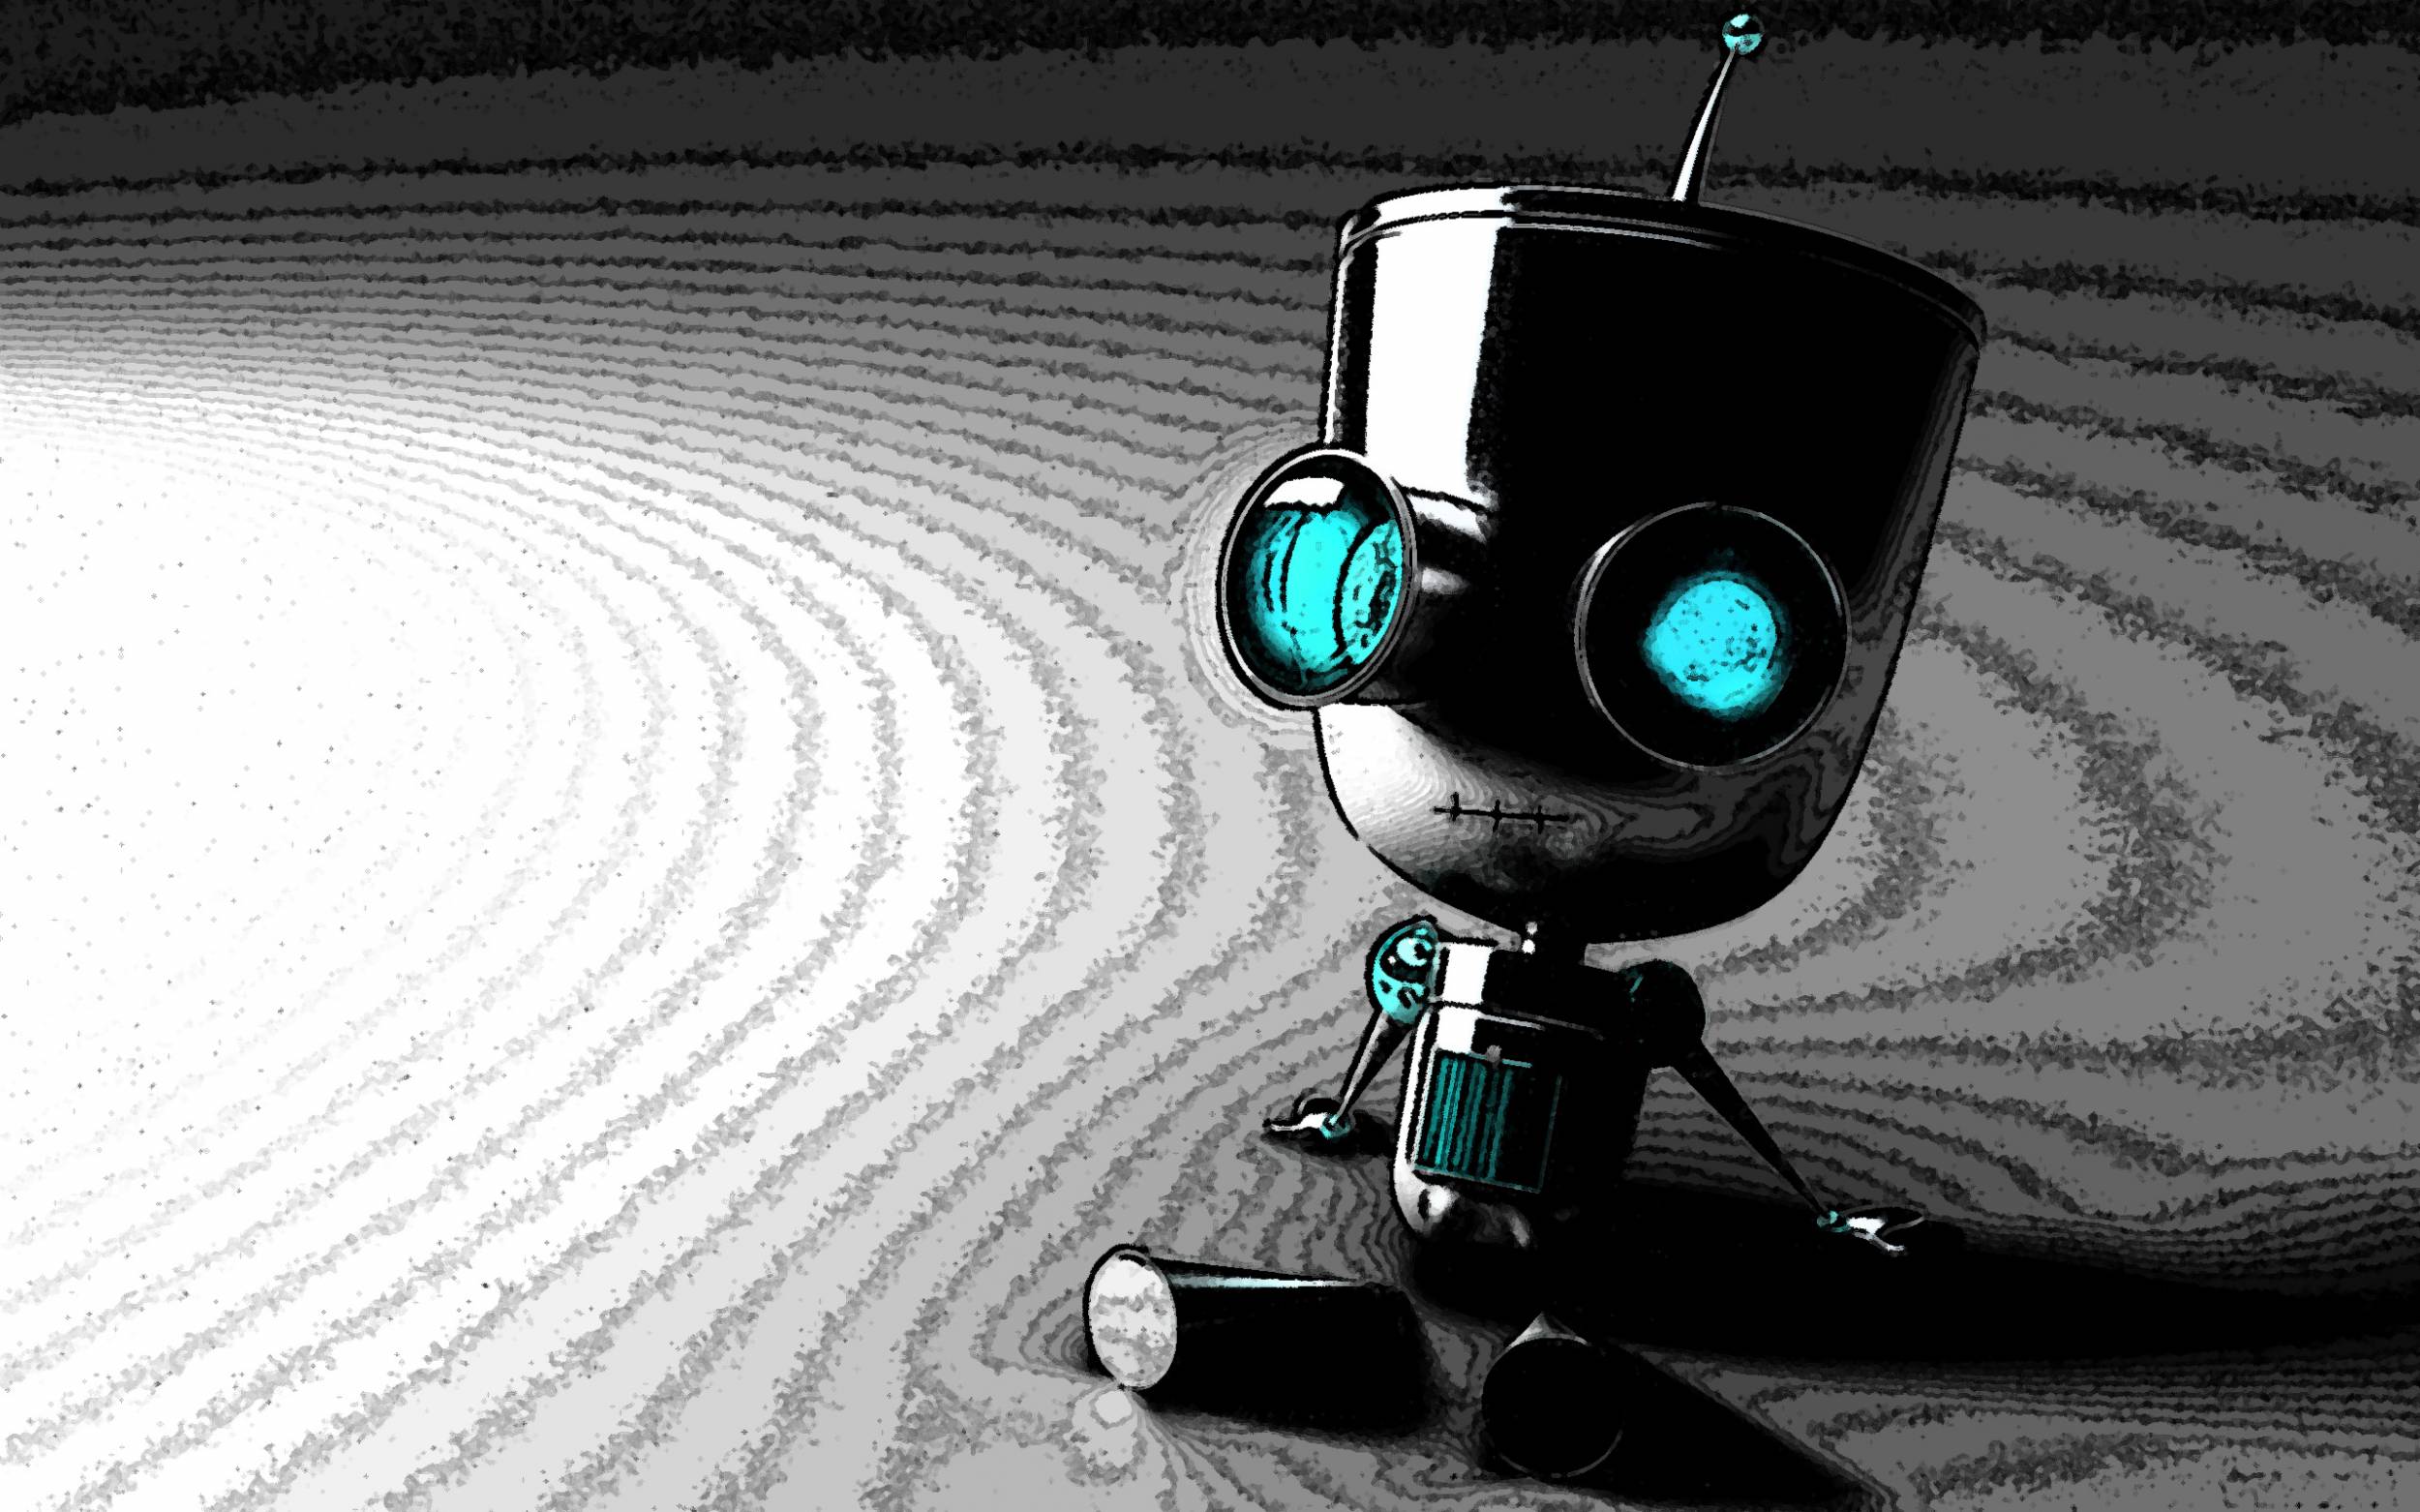 Robot HD Photo for desktop and mobile